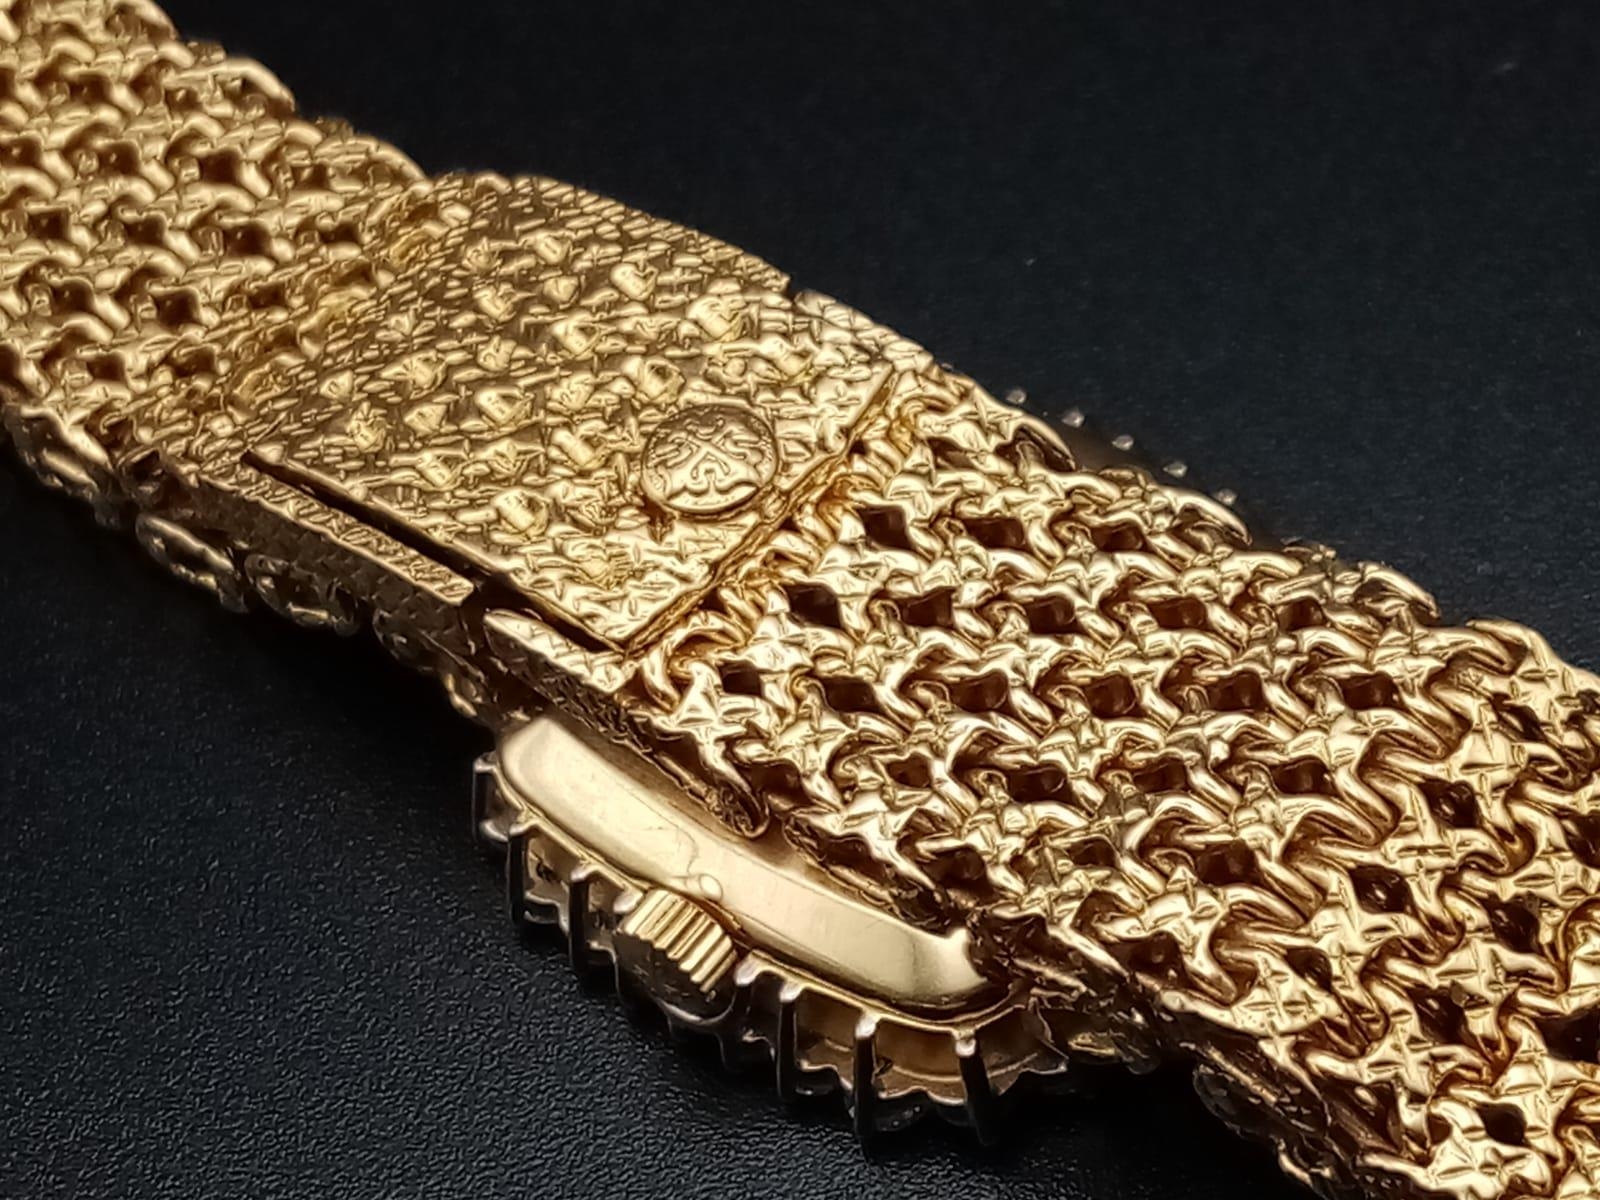 A Patek Phillipe Classic 18K Gold and Diamond Ladies Watch. Woven gold bracelet. Gold case - 24mm. - Image 6 of 11